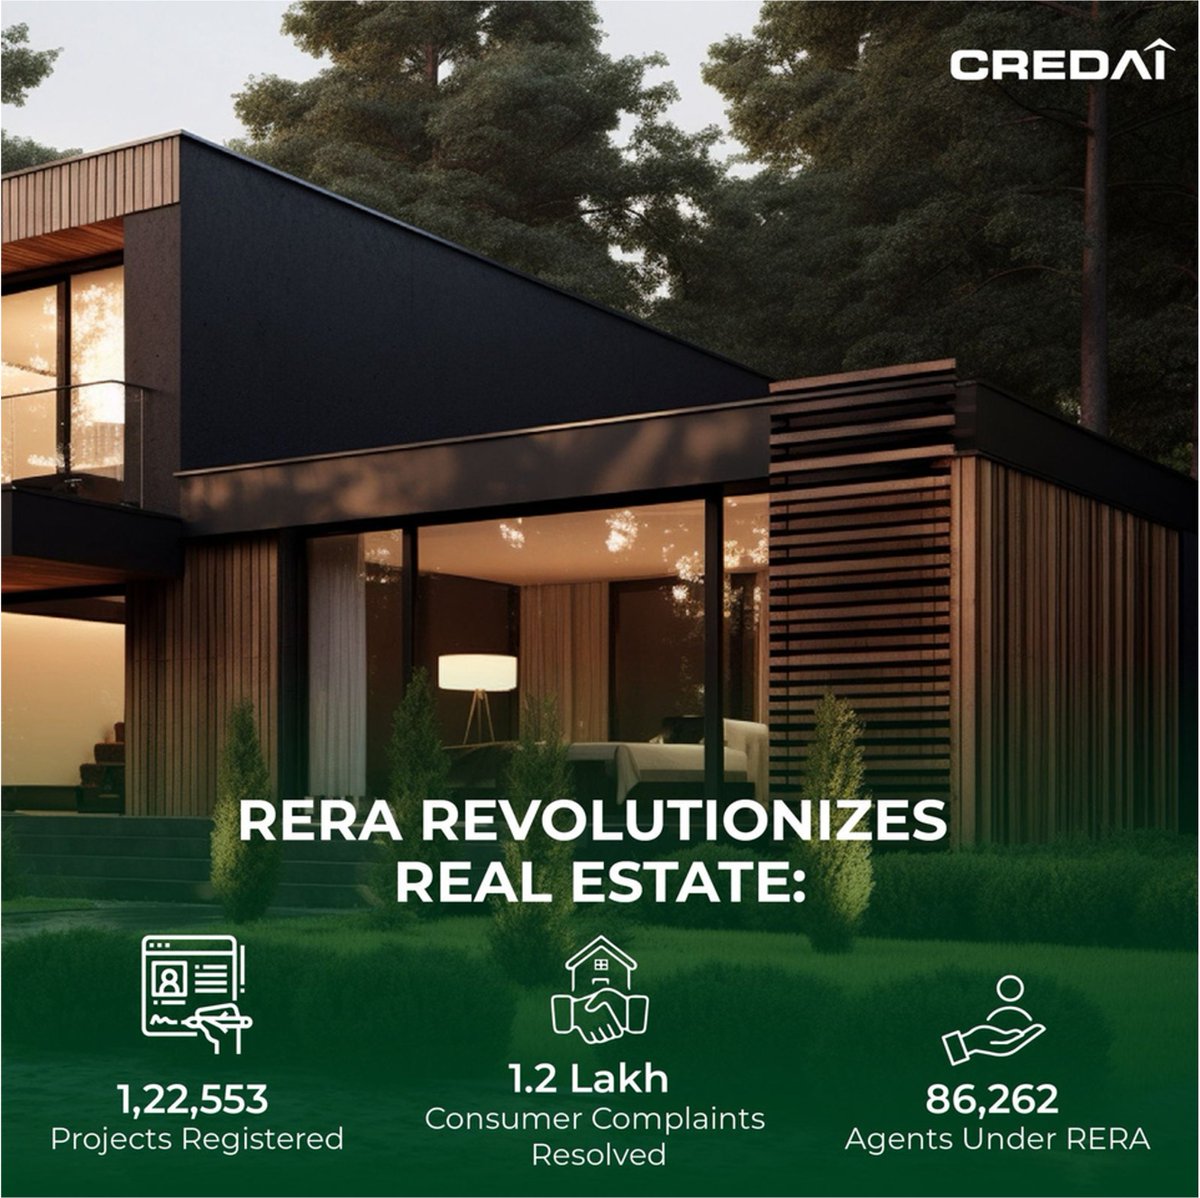 The enactment of real estate regulatory law 'RERA' is reshaping the real estate industry landscape for the better. #CREDAI #CREDAINational #RERA #RealEstate #Regulation #Transparency #Fairness #PropertyLaw #HomeBuyers #BuyersProtection #LegalFramework #IndianRealEstate